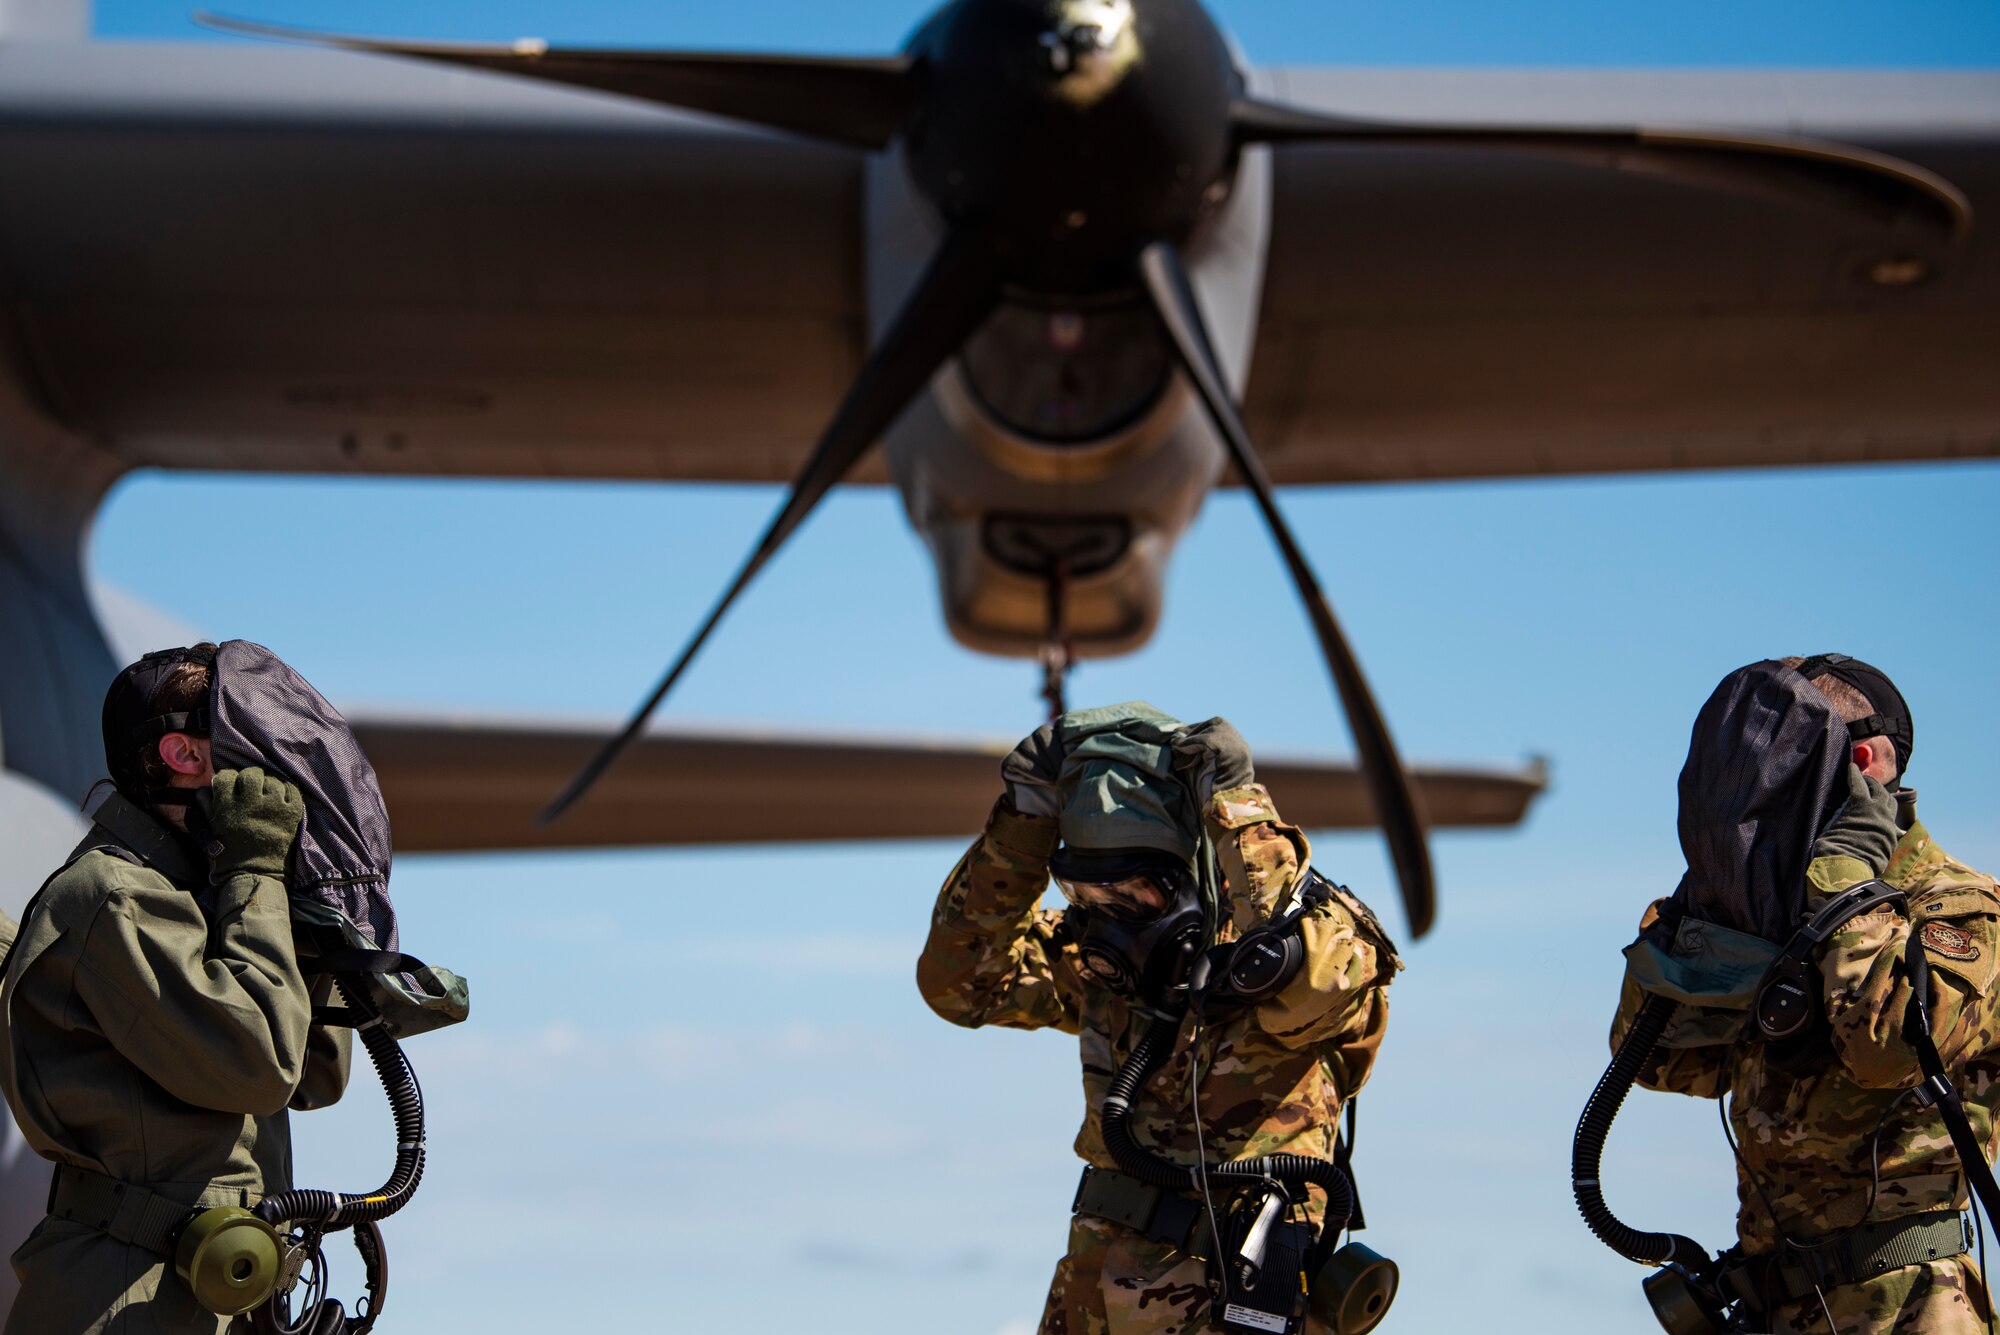 1st Lt. Coltan Nading, 40th Airlift Squadron pilot, left, Capt. Miranda Mila, 40th AS pilot, center, and Senior Airmen Noah Isom, 39th AS loadmaster, remove their gas masks next to a C-130J Super Hercules at Dyess Air Force Base, Texas, June 2, 2021. The aircrew demonstrated the operability of the new Two-Piece Undergarment universal integrative ensemble chemical protective suit during simulated preflight and ground egress procedures.